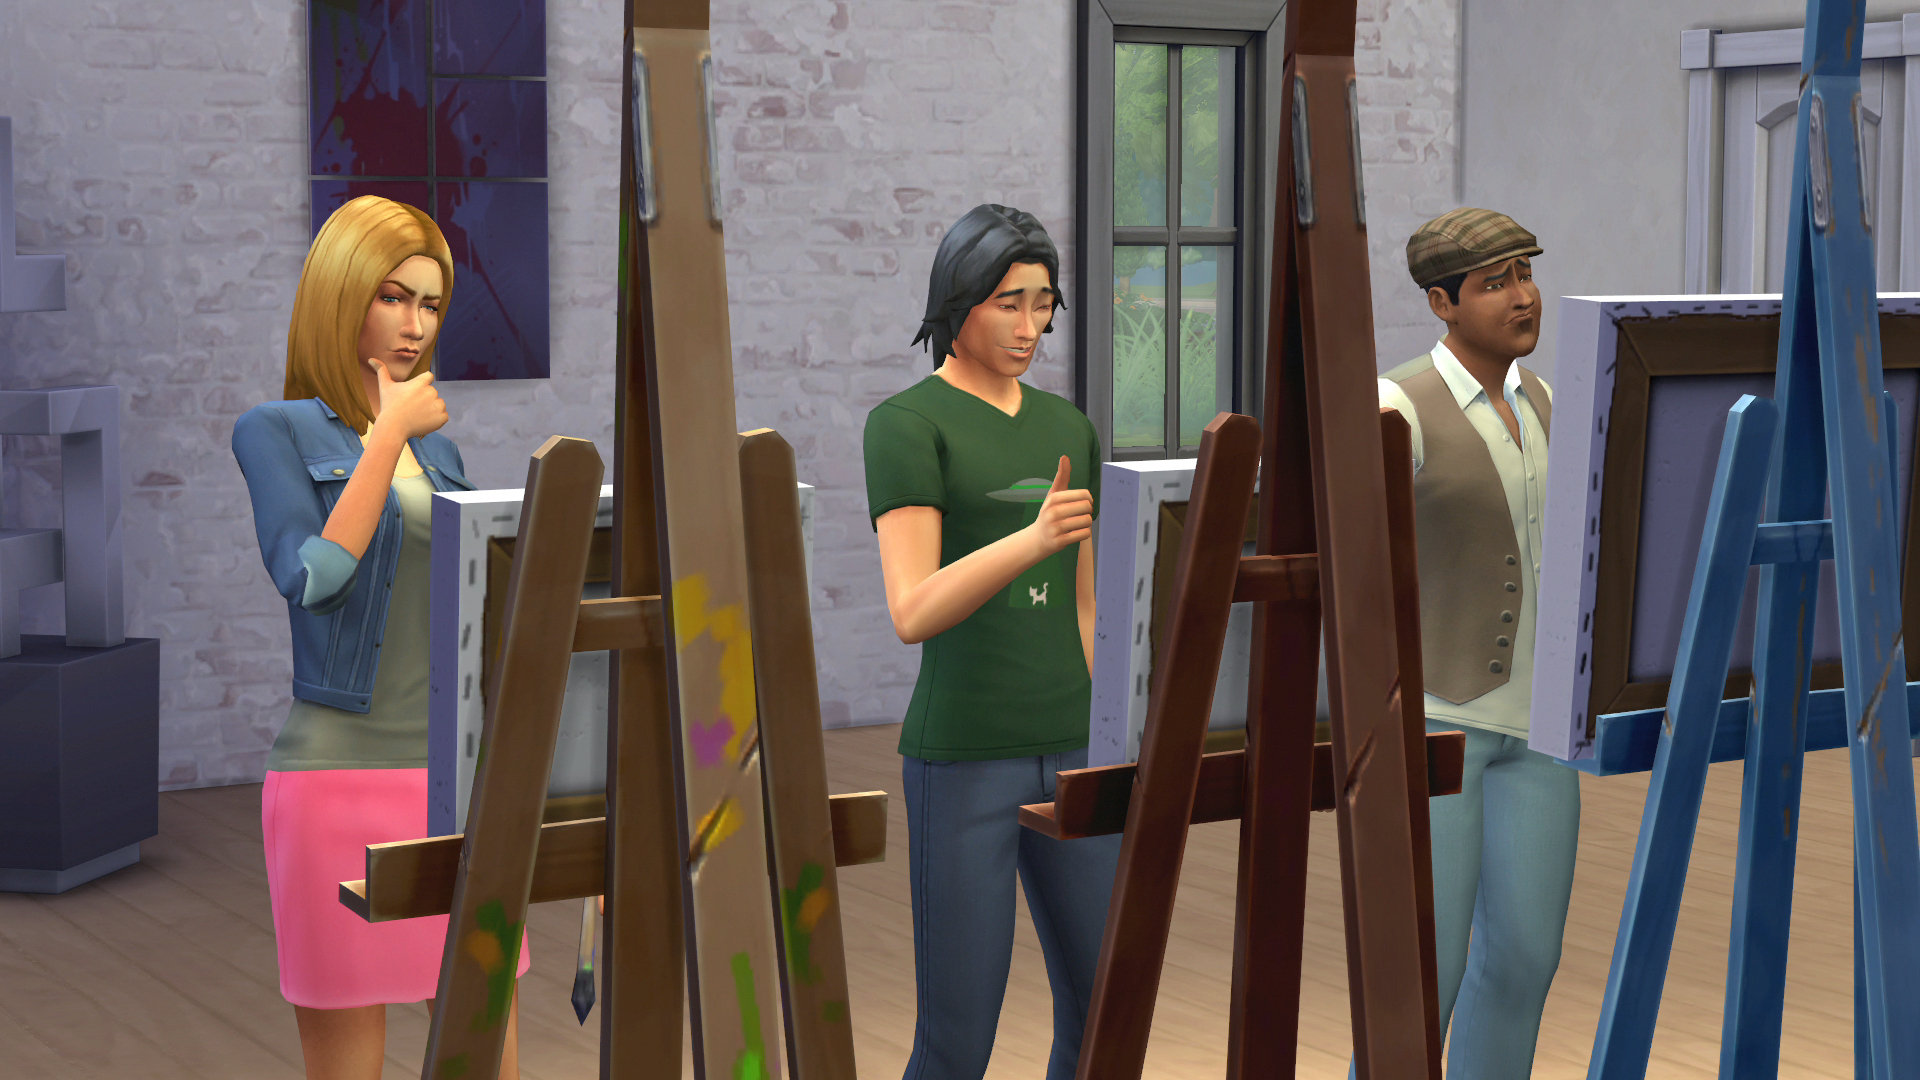 The Sims 4 cheats: every cheat code for easy money, building, skills and  more